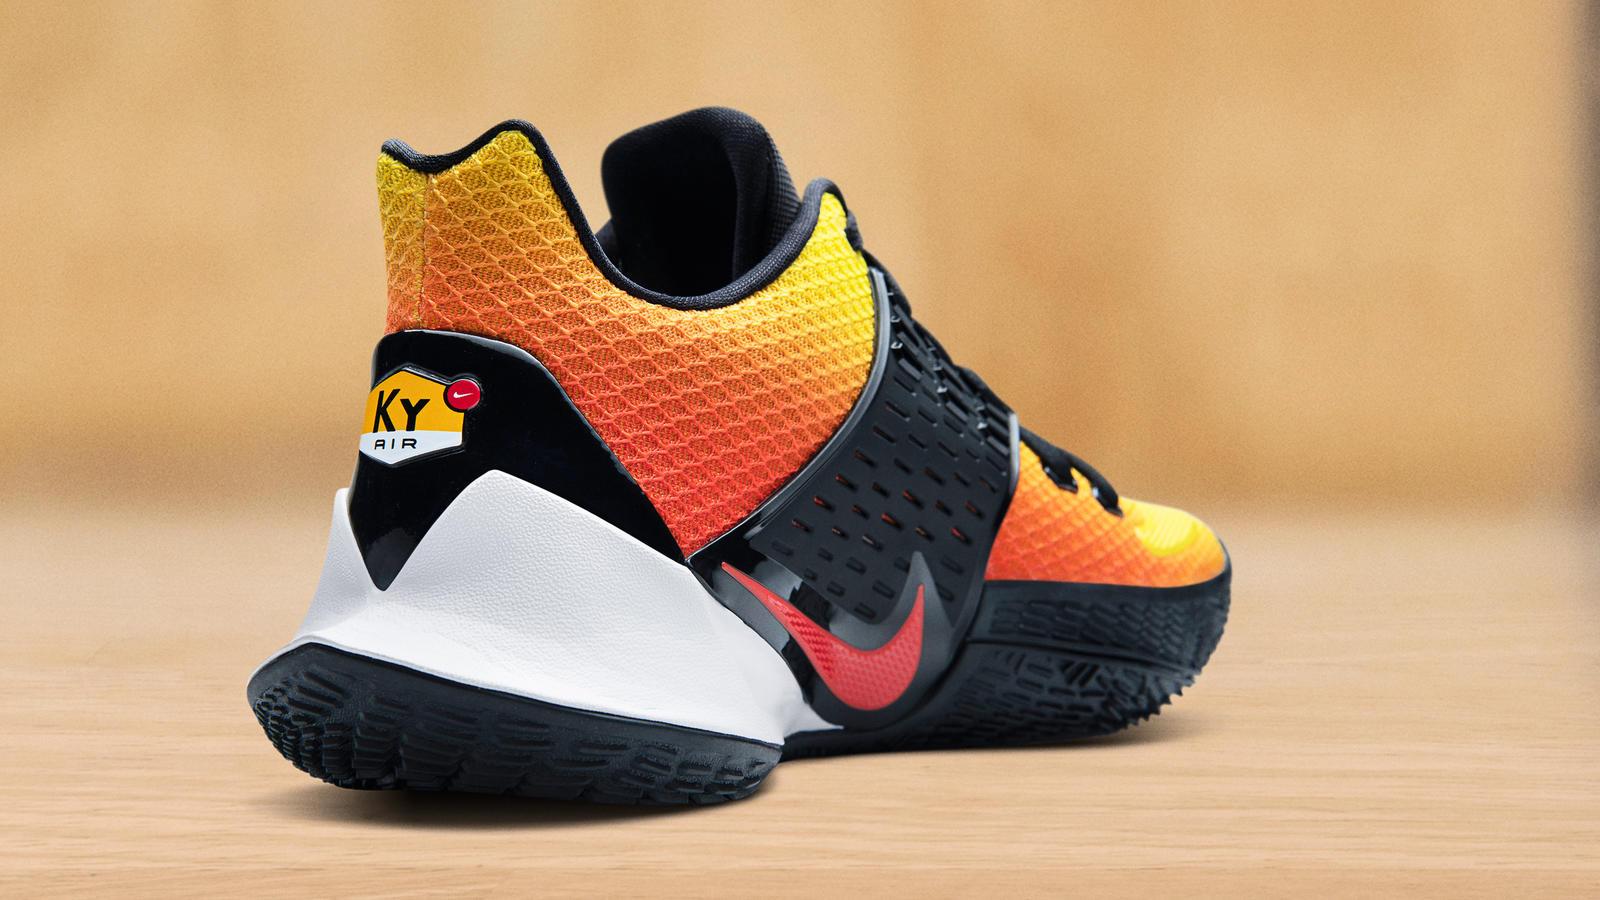 Nike Kyrie Low 2 Team Orange Official Image and Release